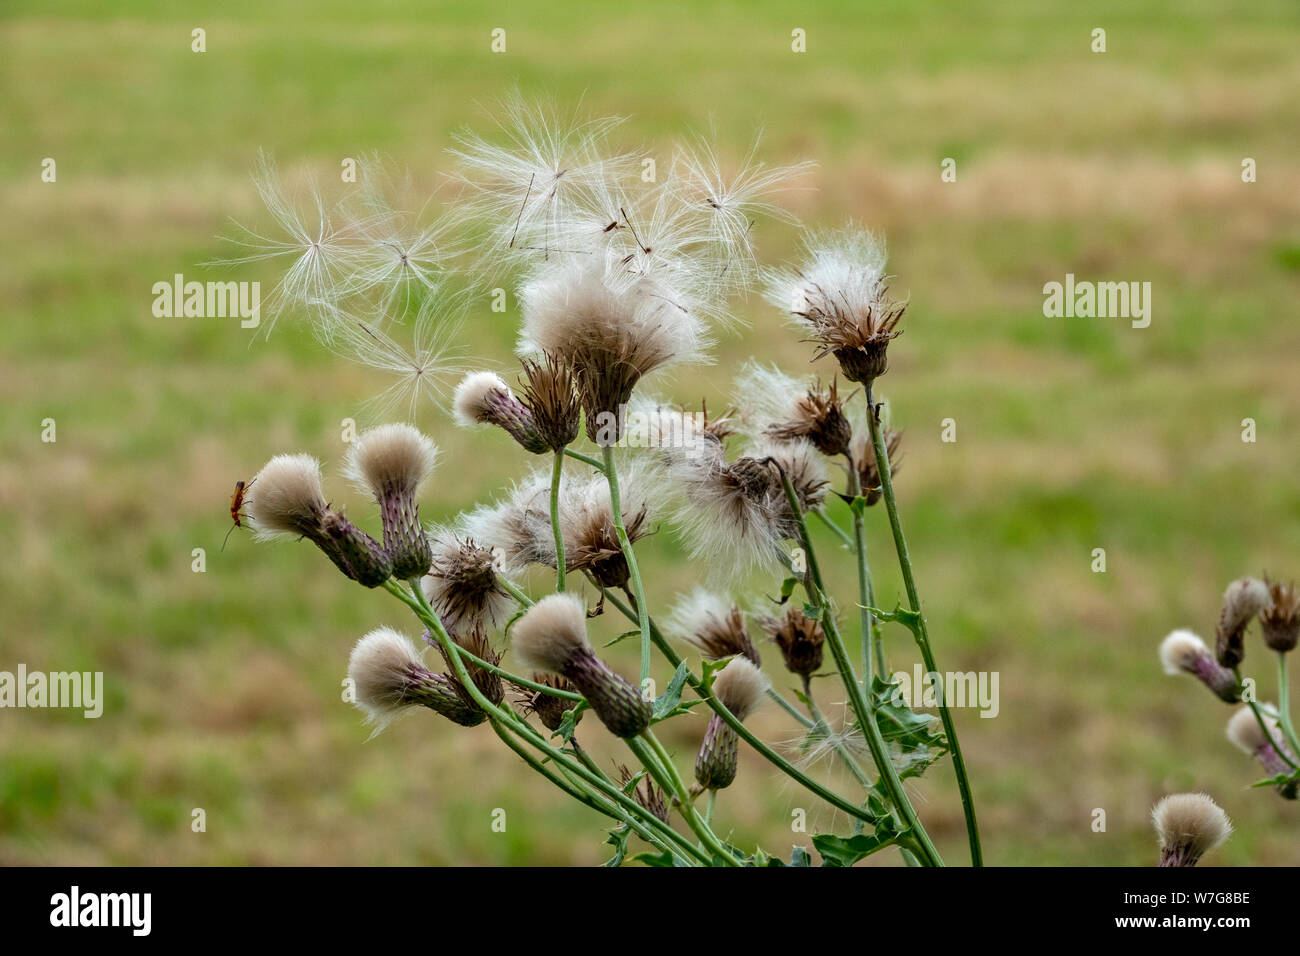 Thistle seed heads caught in the wind detaching from the plant with soft focus field in the background Stock Photo